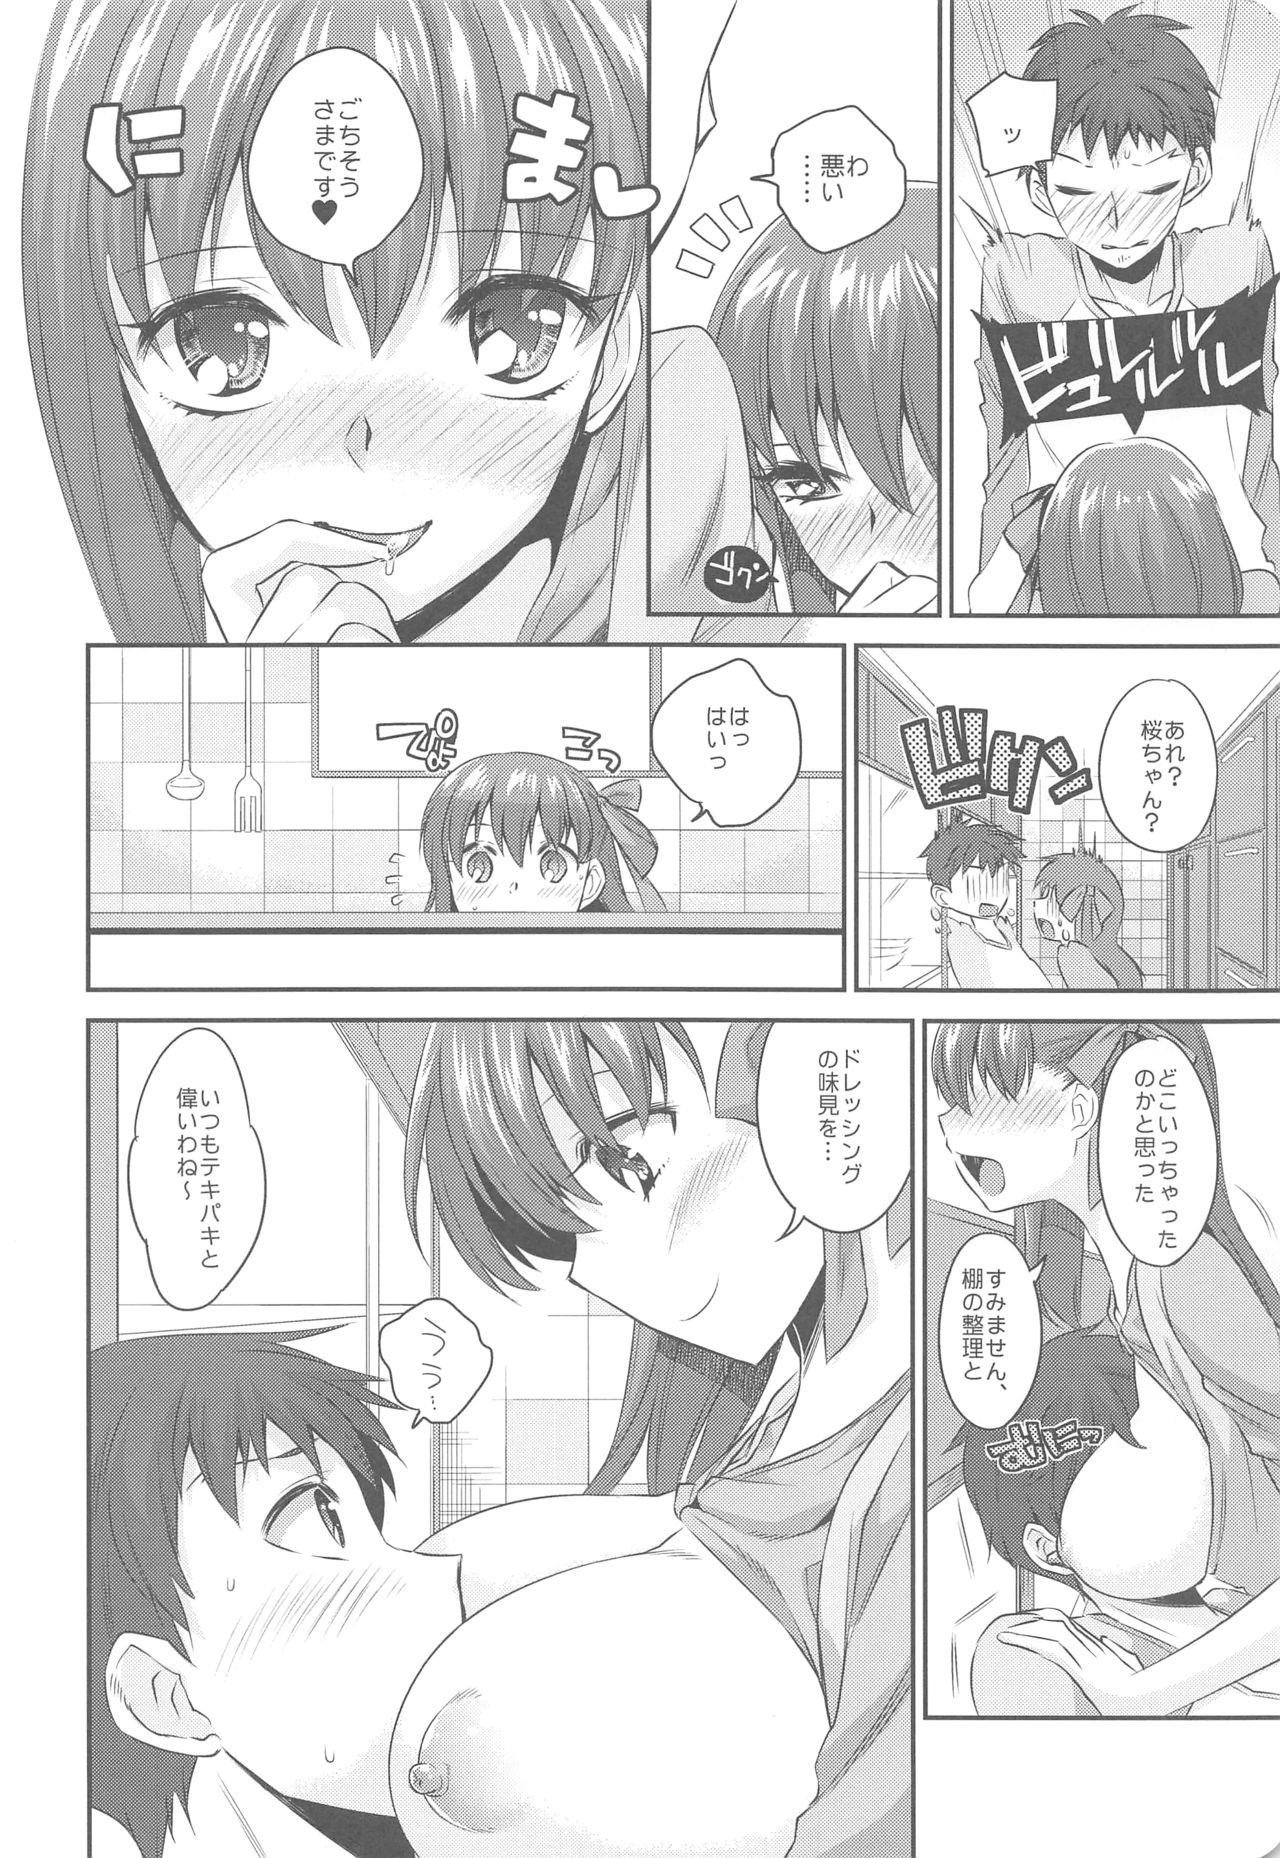 Famosa Kitchen H - Fate stay night Francaise - Page 8